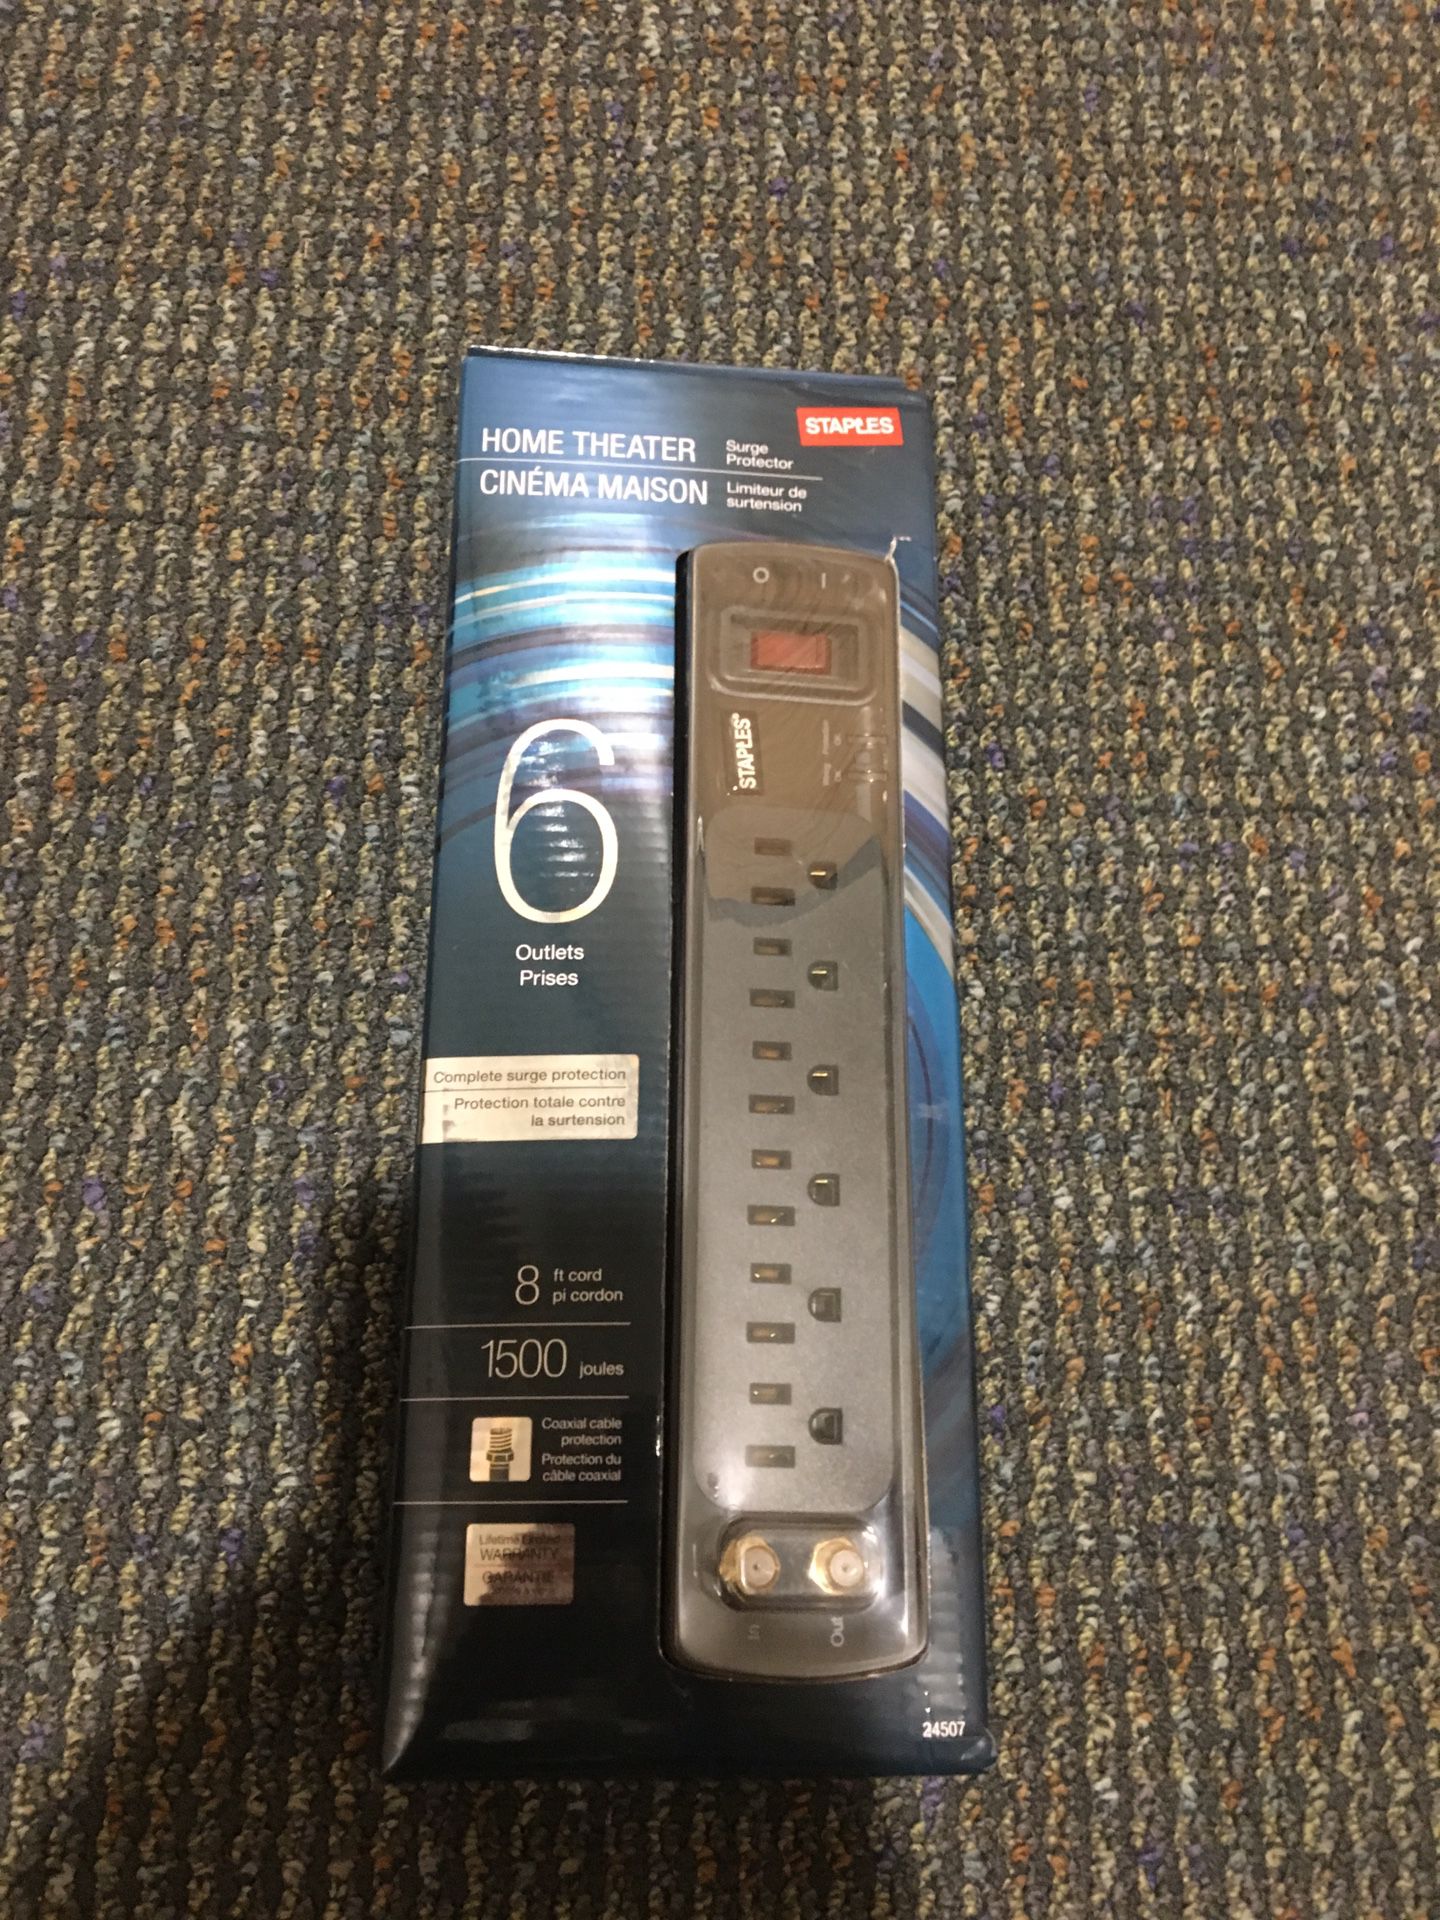 Staples Home Theater surge protector